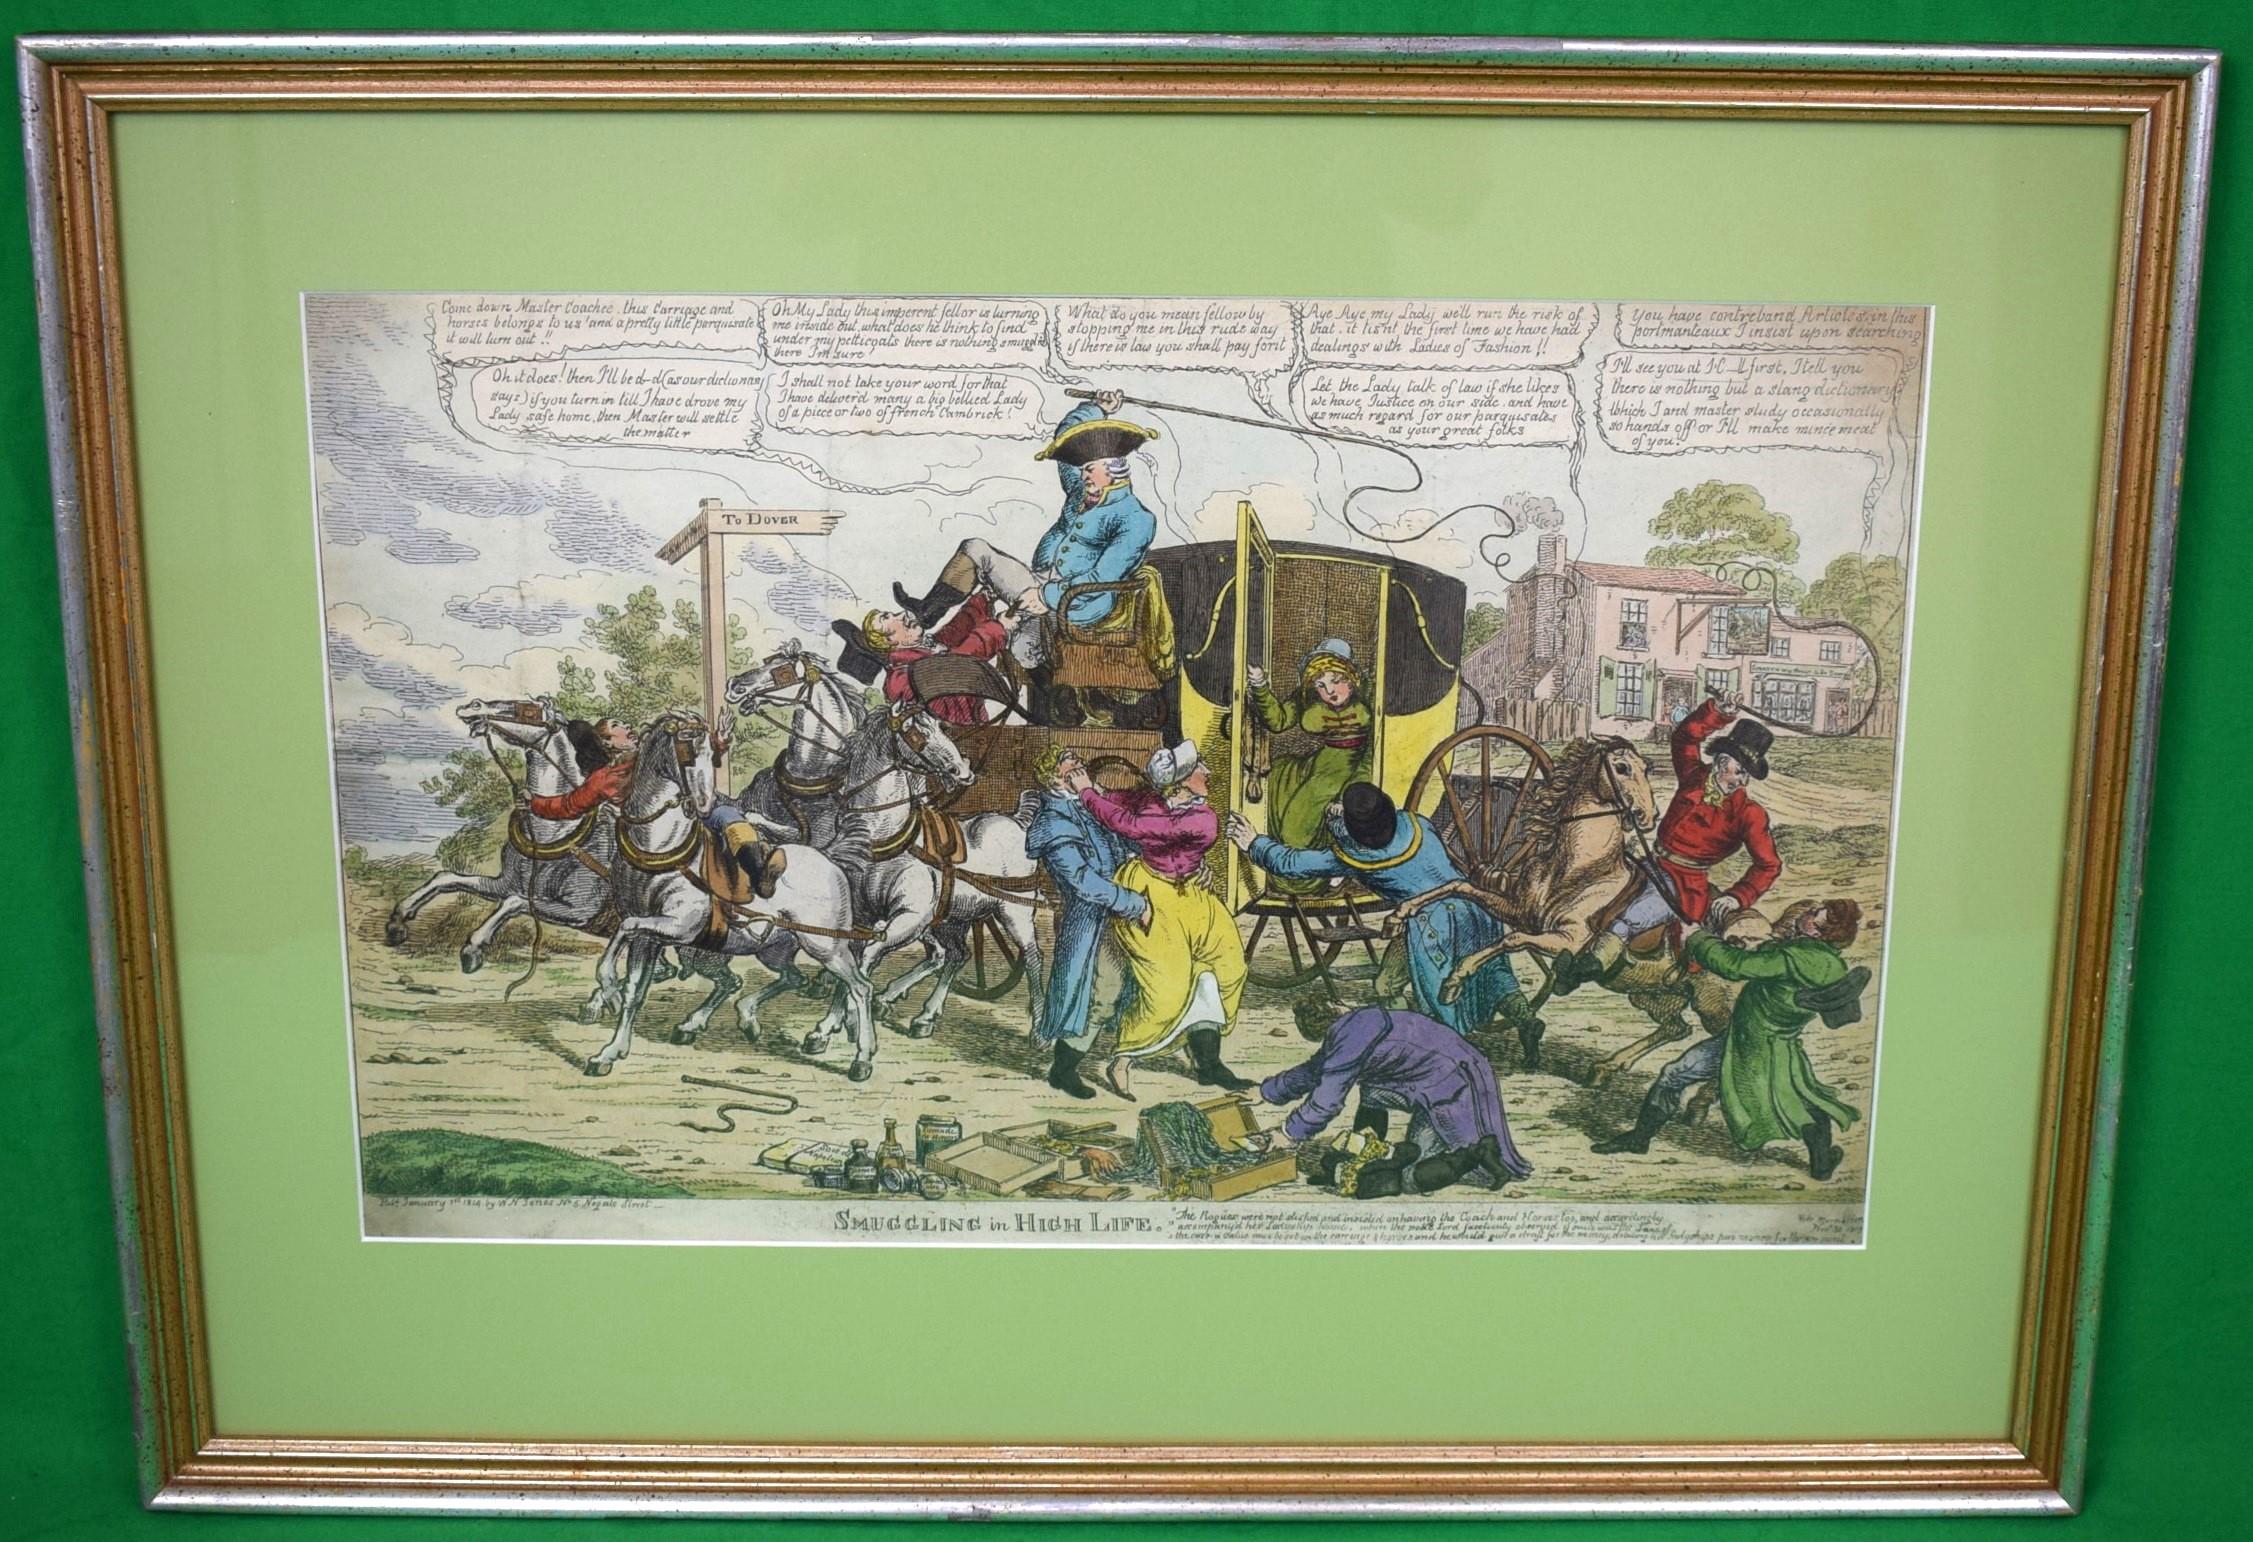 Art Sz: 10"H x 16"W

Frame Sz: 15 1/2"H x 21"W

Pub, January 1st 1814

Property from the Estate of Paula Peyraud

A reserved librarian from Chappaqua, New York, Miss Paula Peyraud was an avid collector